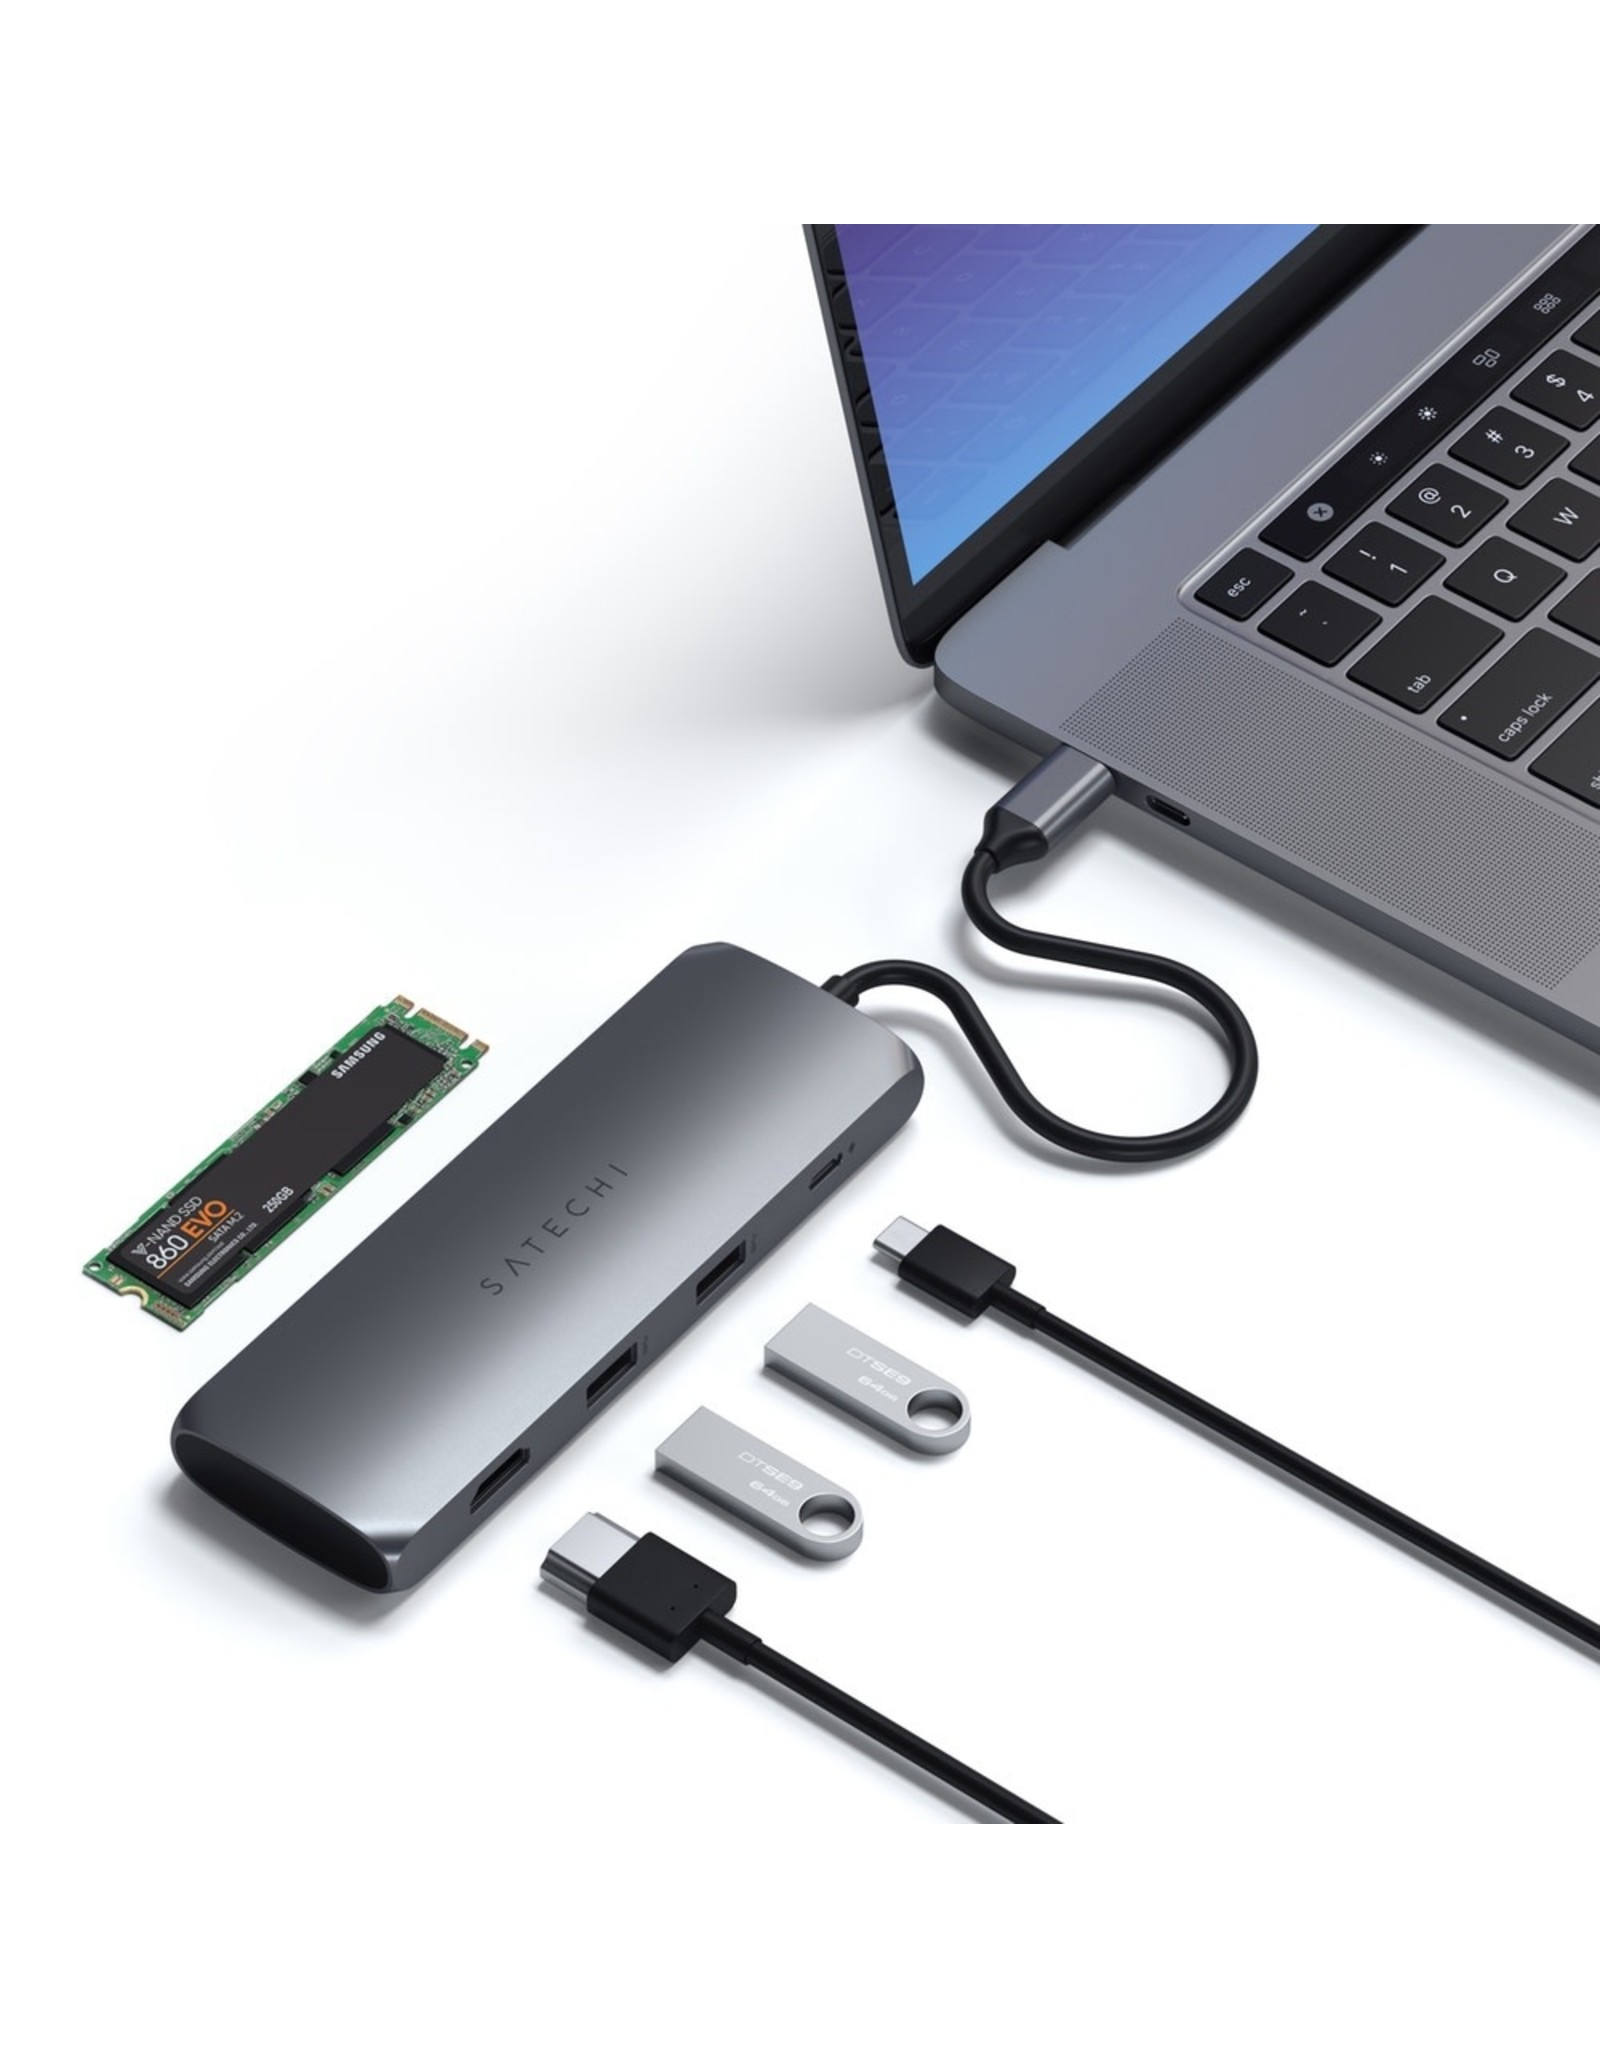 Satechi Satechi USB-C Hybrid Multiport Adapter with SSD Enclosure - Space Grey - fits SATA M.2 SSD (not included)